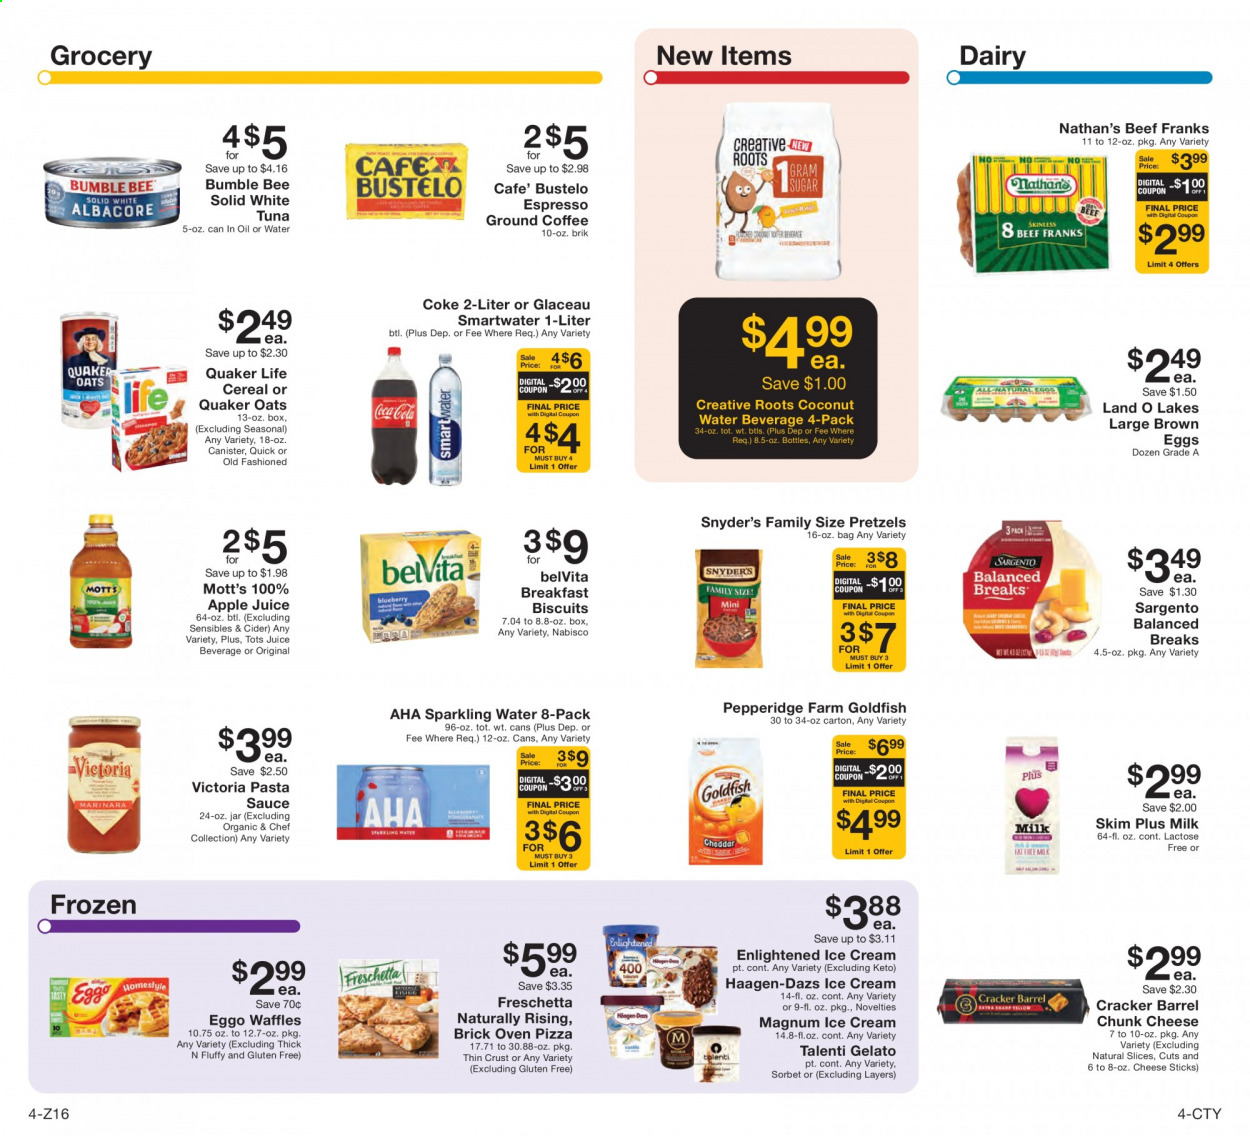 thumbnail - Fairway Market Flyer - 08/27/2021 - 09/02/2021 - Sales products - pretzels, waffles, snack, Mott's, tuna, pizza, pasta sauce, Bumble Bee, sauce, Quaker, frankfurters, chunk cheese, cheese sticks, Sargento, milk, eggs, large eggs, ice cream, Häagen-Dazs, Talenti Gelato, Enlightened lce Cream, gelato, sorbet, biscuit, Nabisco, Goldfish, salty snack, sugar, oats, canned tuna, canned fish, cereals, belVita, apple juice, Coca-Cola, coconut water, soft drink, Coke, sparkling water, bottled water, Smartwater, carbonated soft drink, ground coffee, alcohol, cider. Page 4.